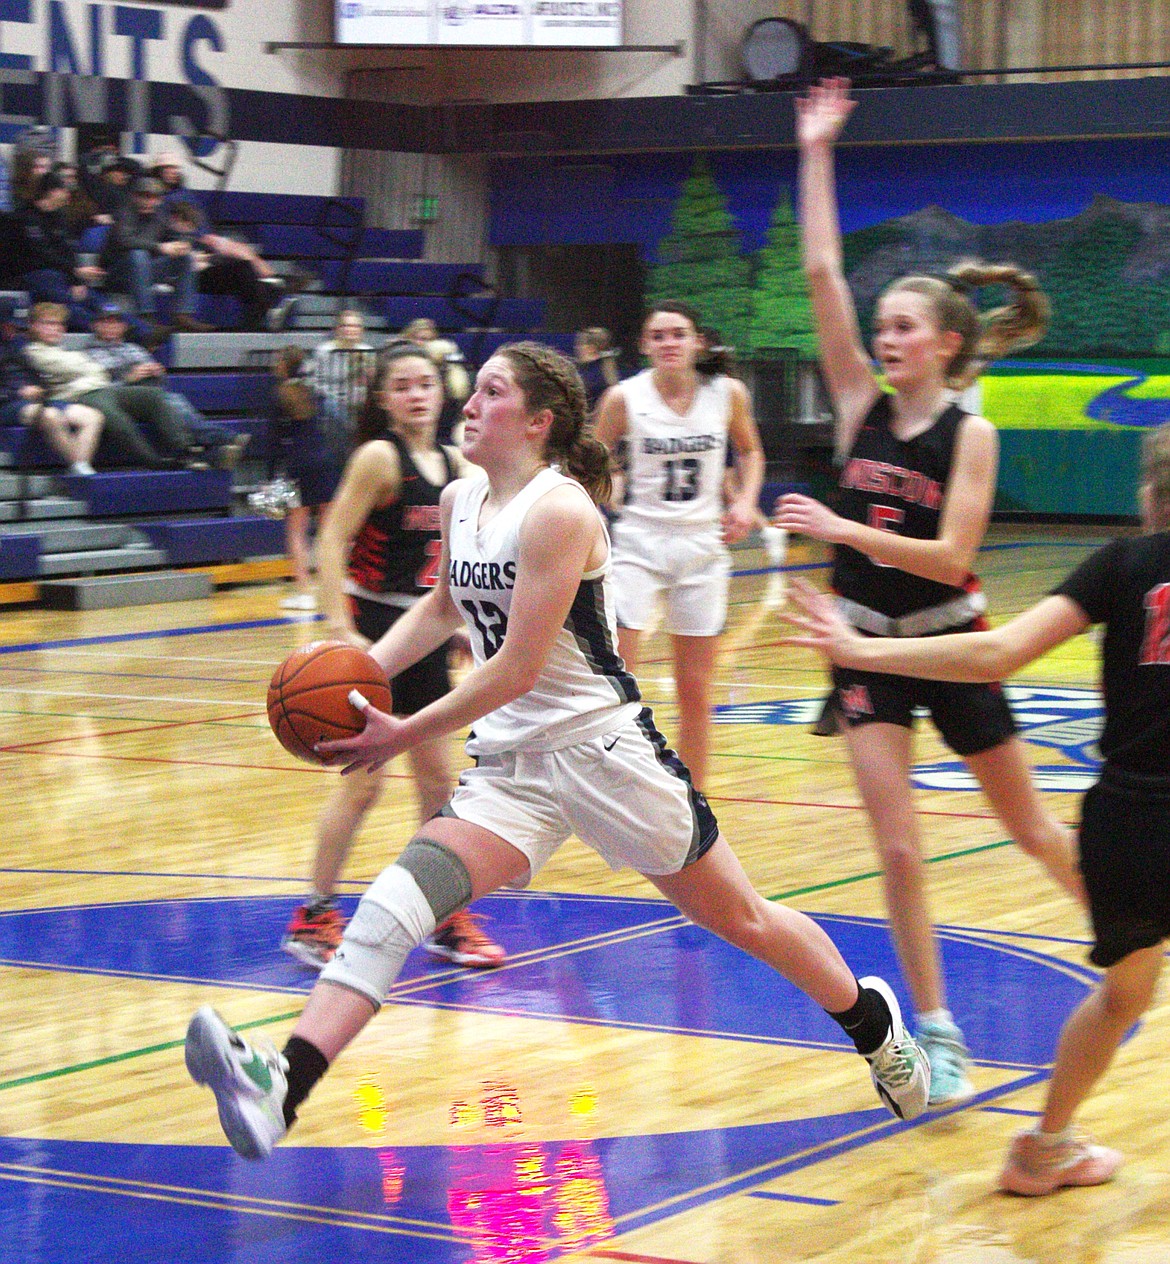 Sydney Hinthorn drives to the hoop against Moscow earlier in the season.